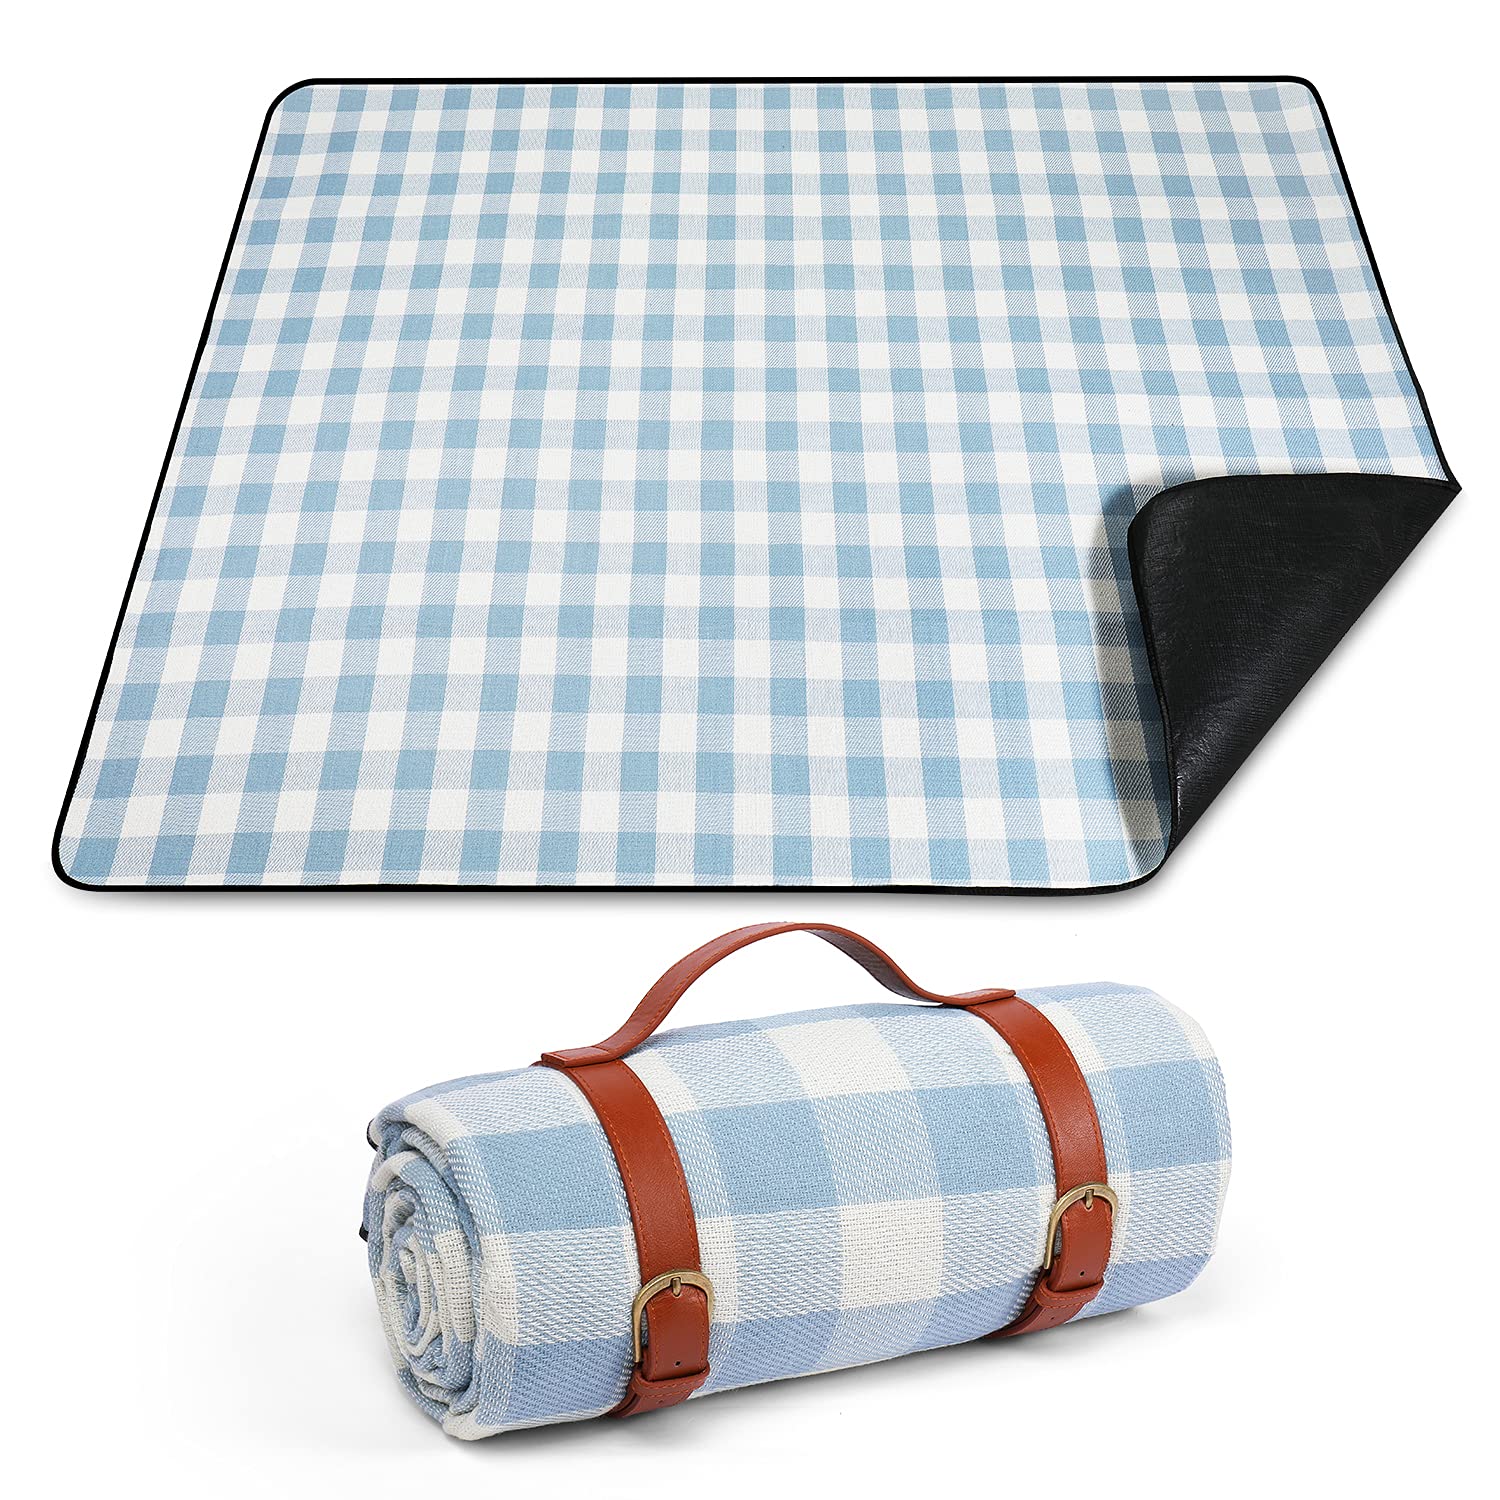 Purezento Picnic Blanket with Waterproof Backing, Large Picnic Mat Portable Folding, Washable Outdoor Picnic Blankets for Kids Playground, Beach, Camping, Wet Grass - Blue Plaid, 150 x 200 cm